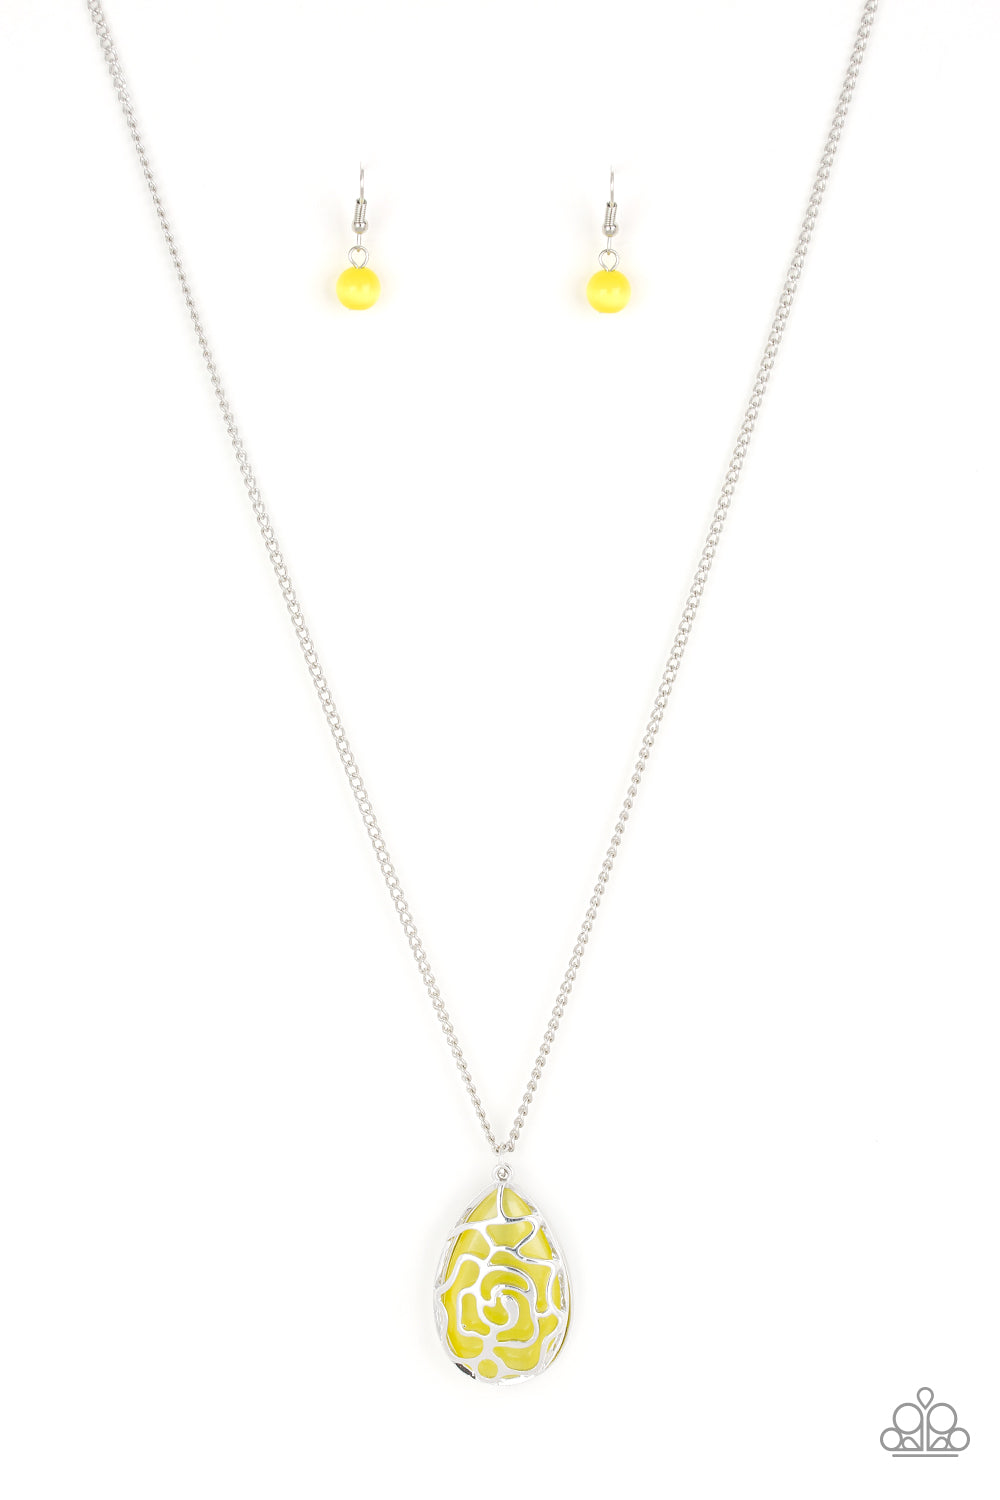 GLEAMING GARDENS - YELLOW NECKLACE